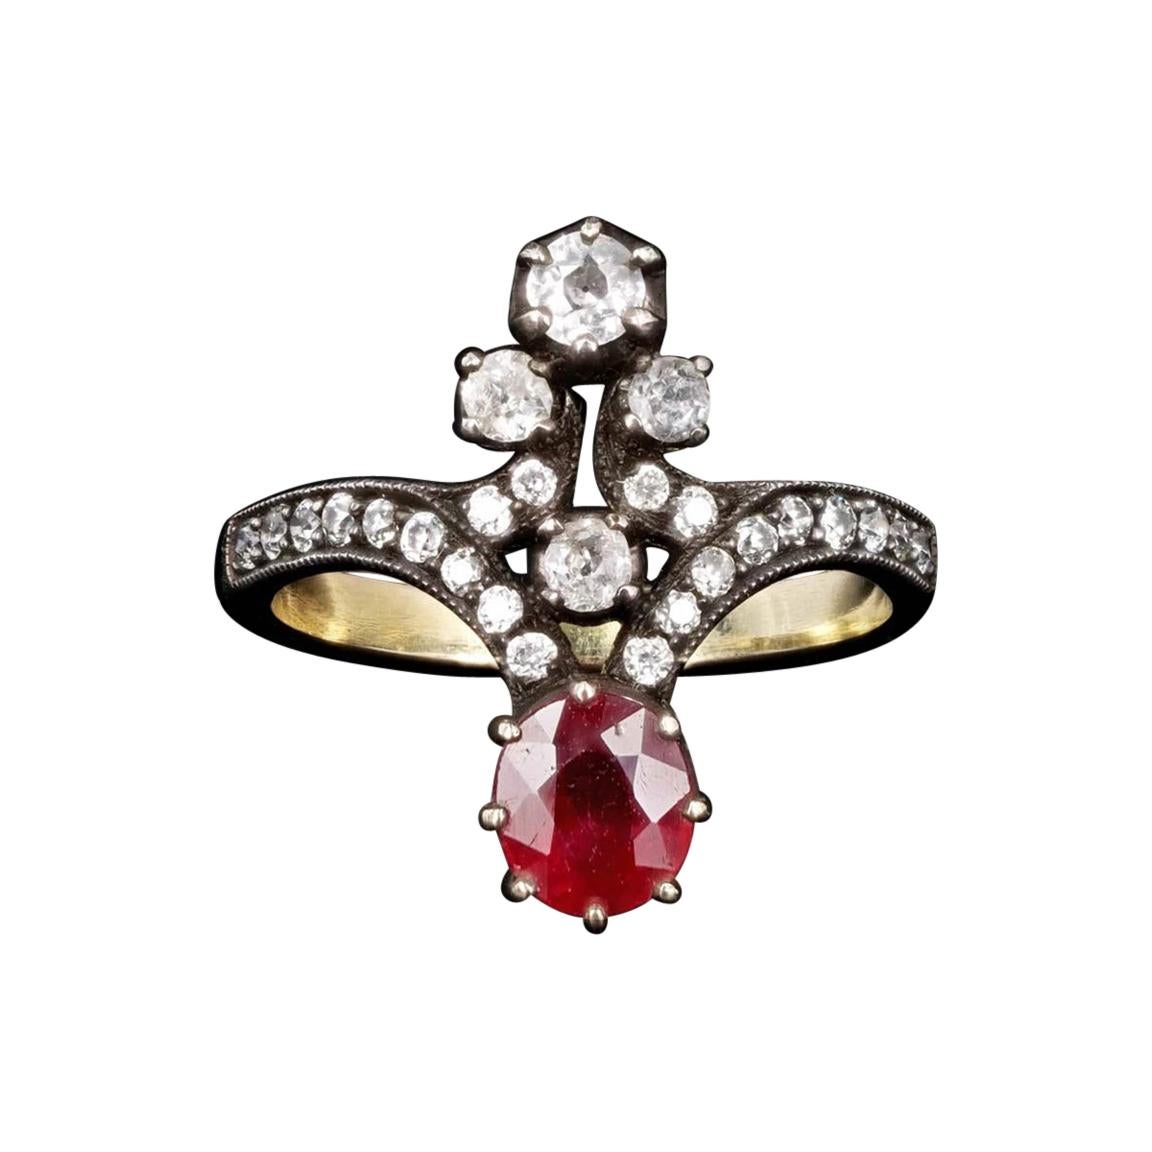 Victorian 18K Yellow Gold Silver Top 1 Carat Natural Ruby and Diamond Ring Size